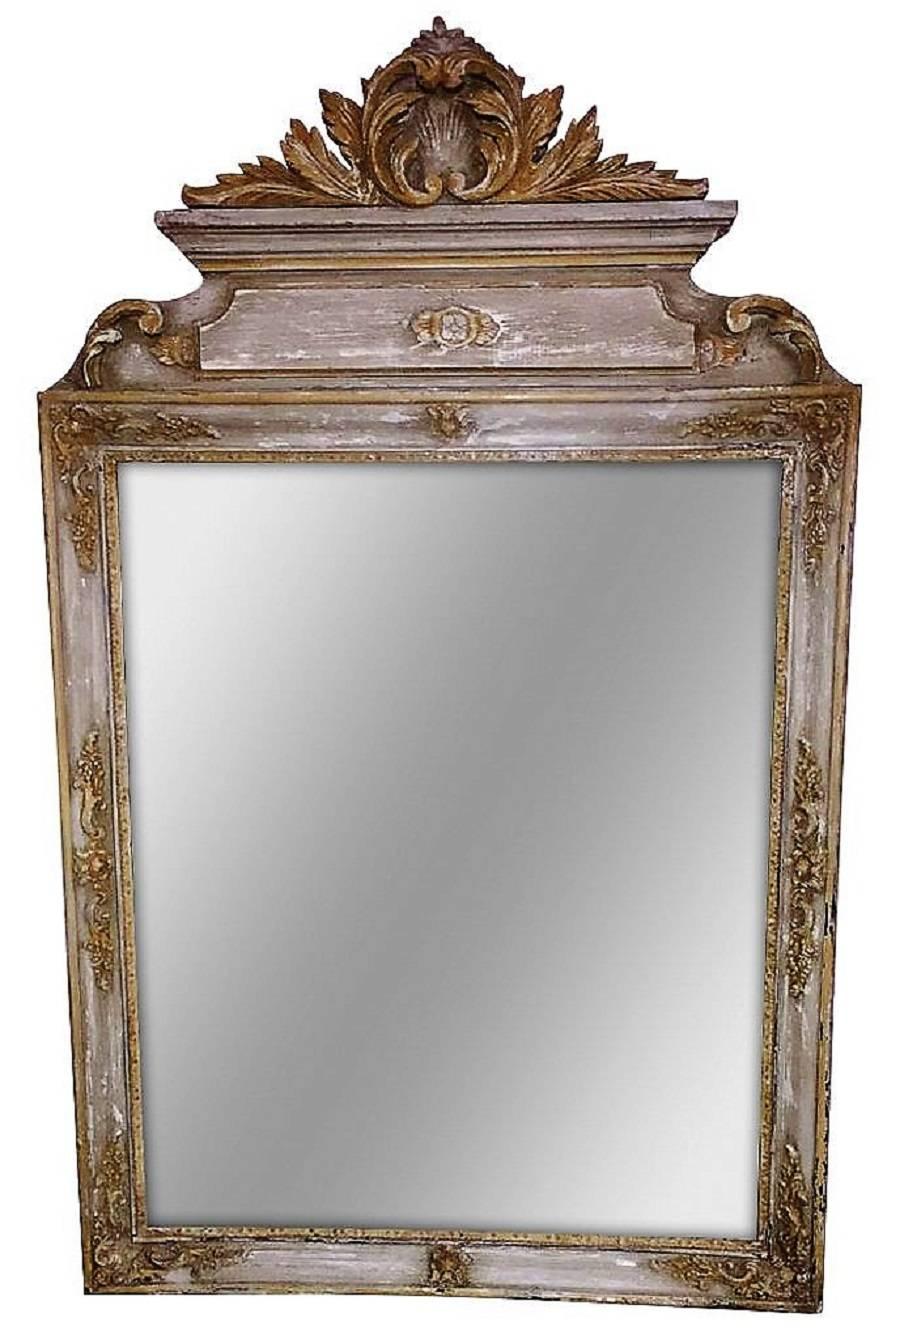 Italian carved and painted mirror, early 19th century.